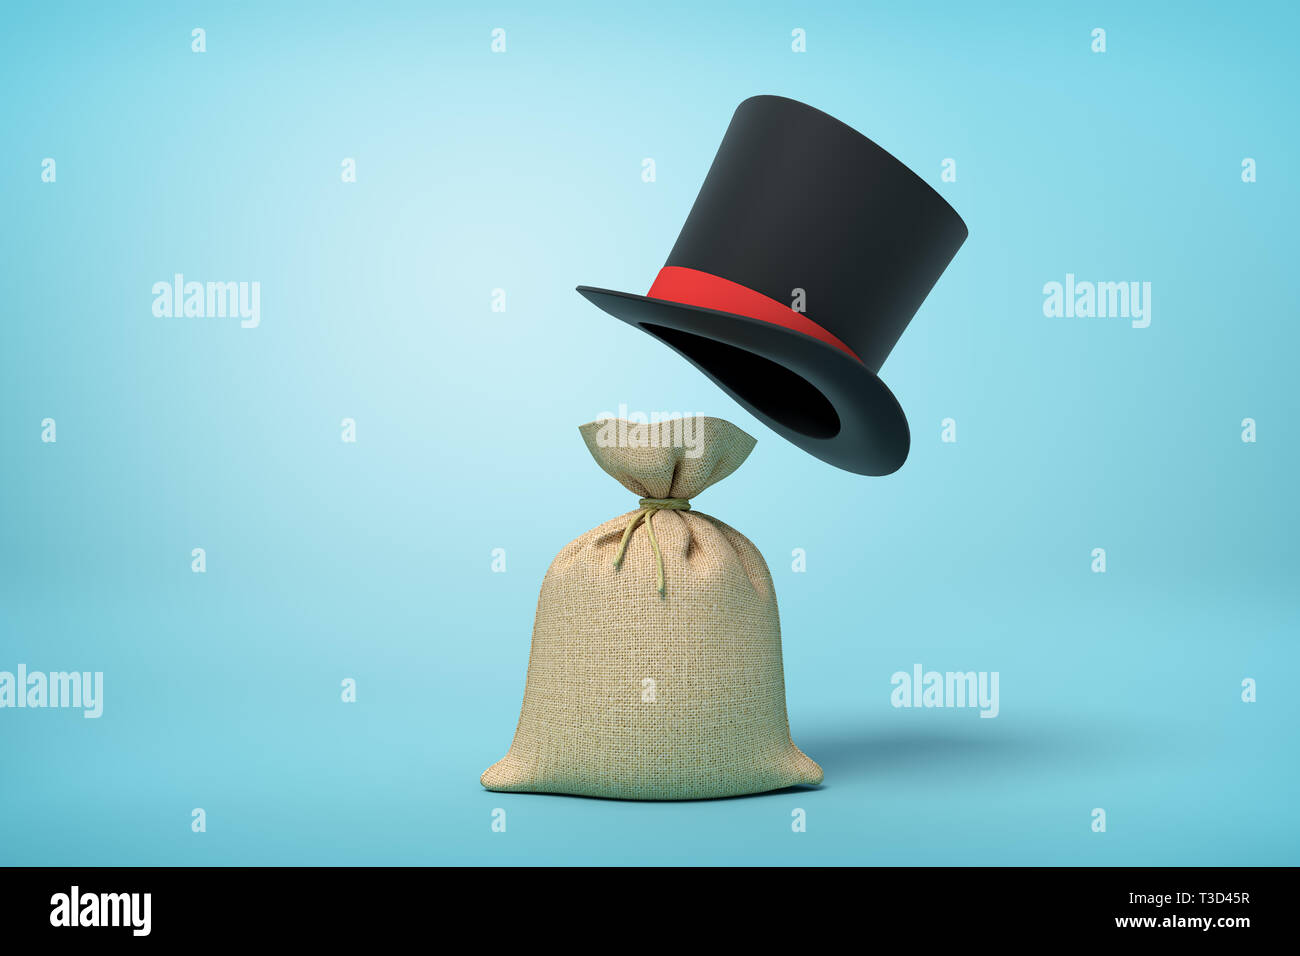 3d rendering of light-brown canvas money sack and big black tophat floating in air above it on light blue background. Stock Photo